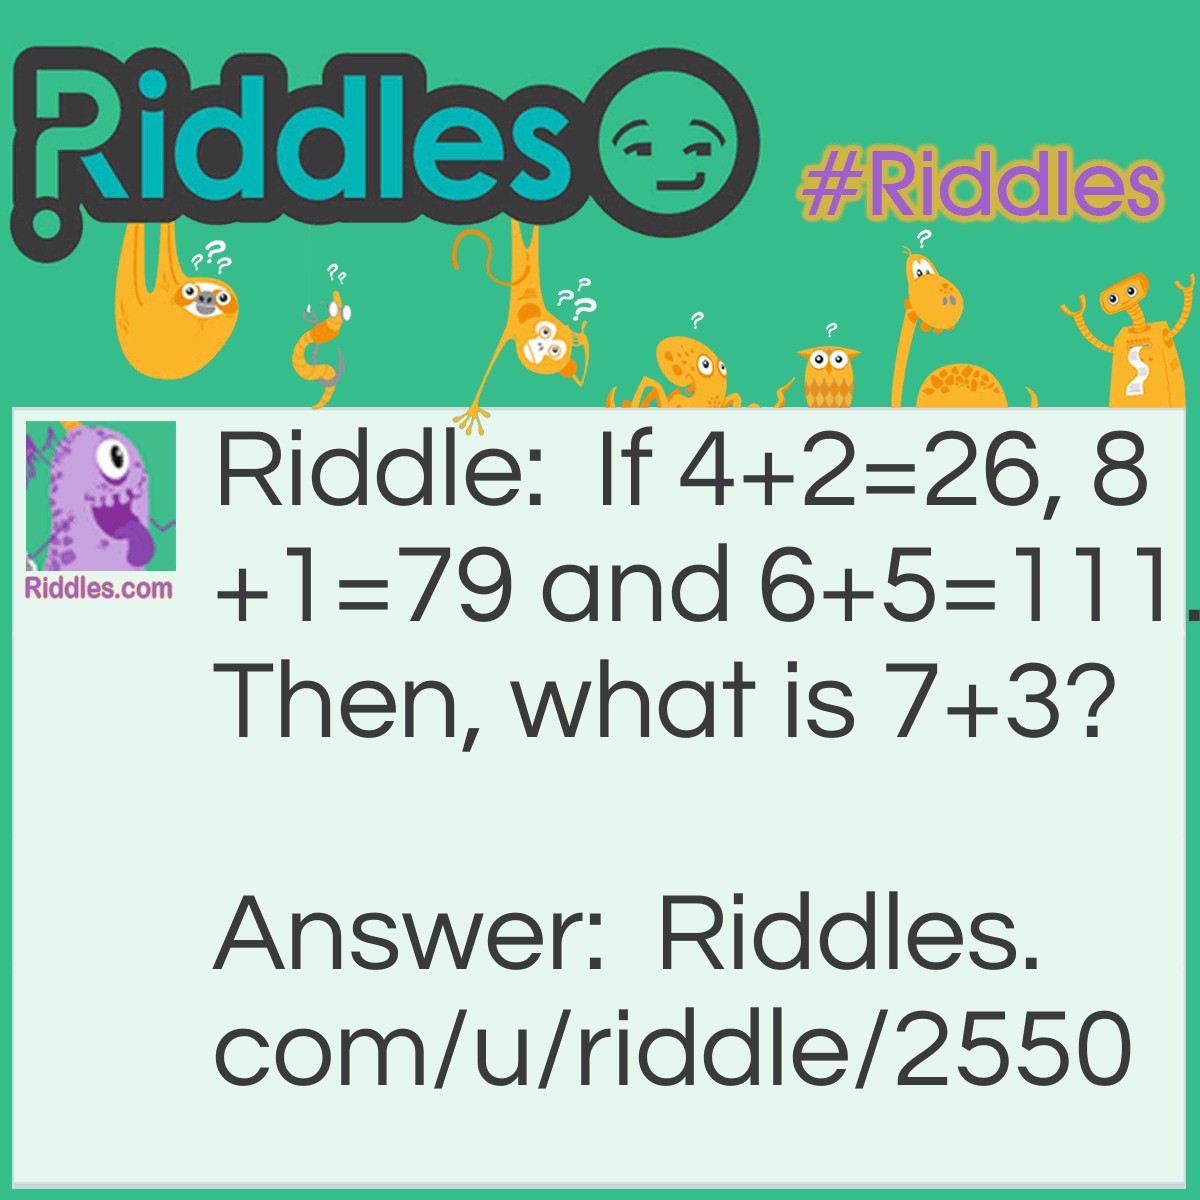 Riddle: If 4+2=26, 8+1=79 and 6+5=111. Then, what is 7+3? Answer: 410. 4+2=26 is because 4-2=2 and 4+2=6,so it is 26. Therefore, 7-3=4 and 7+3=10(410).